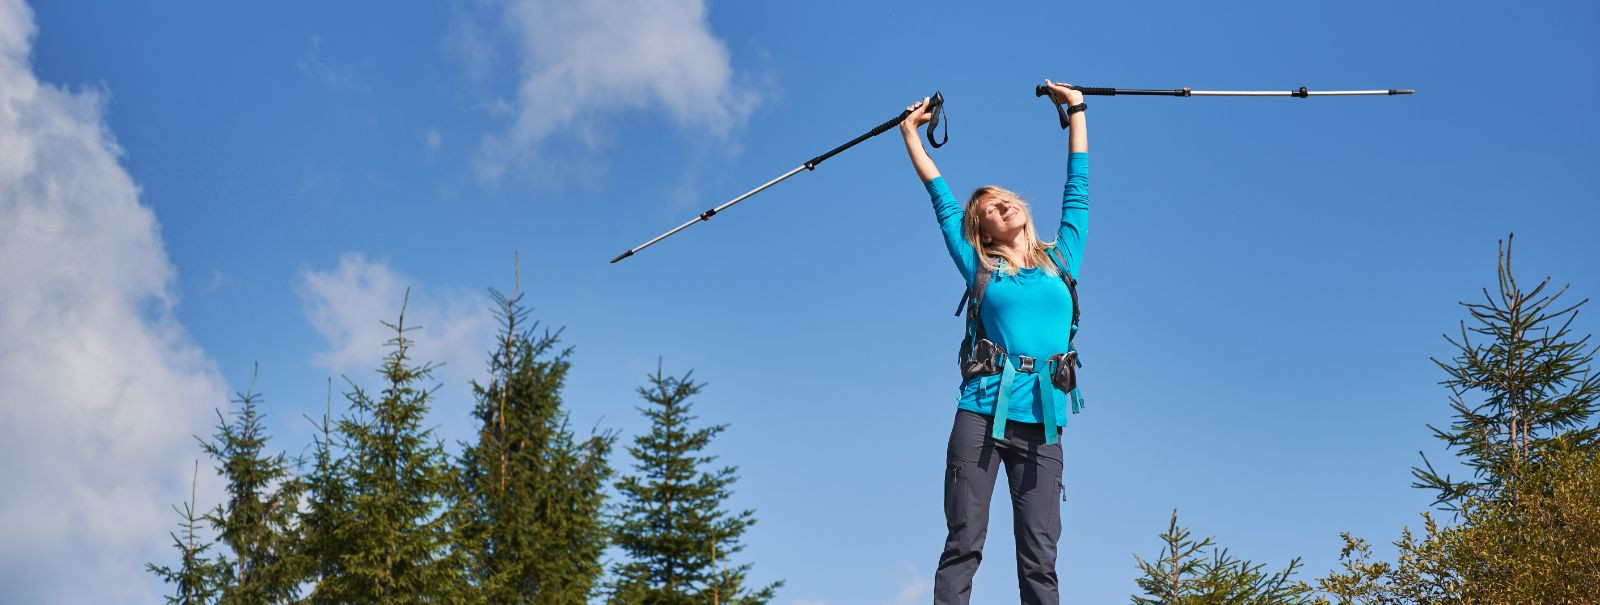 Stick walking, also known as Nordic walking, is a low-impact, full-body exercise that involves walking with specially designed walking sticks. It is a form of e